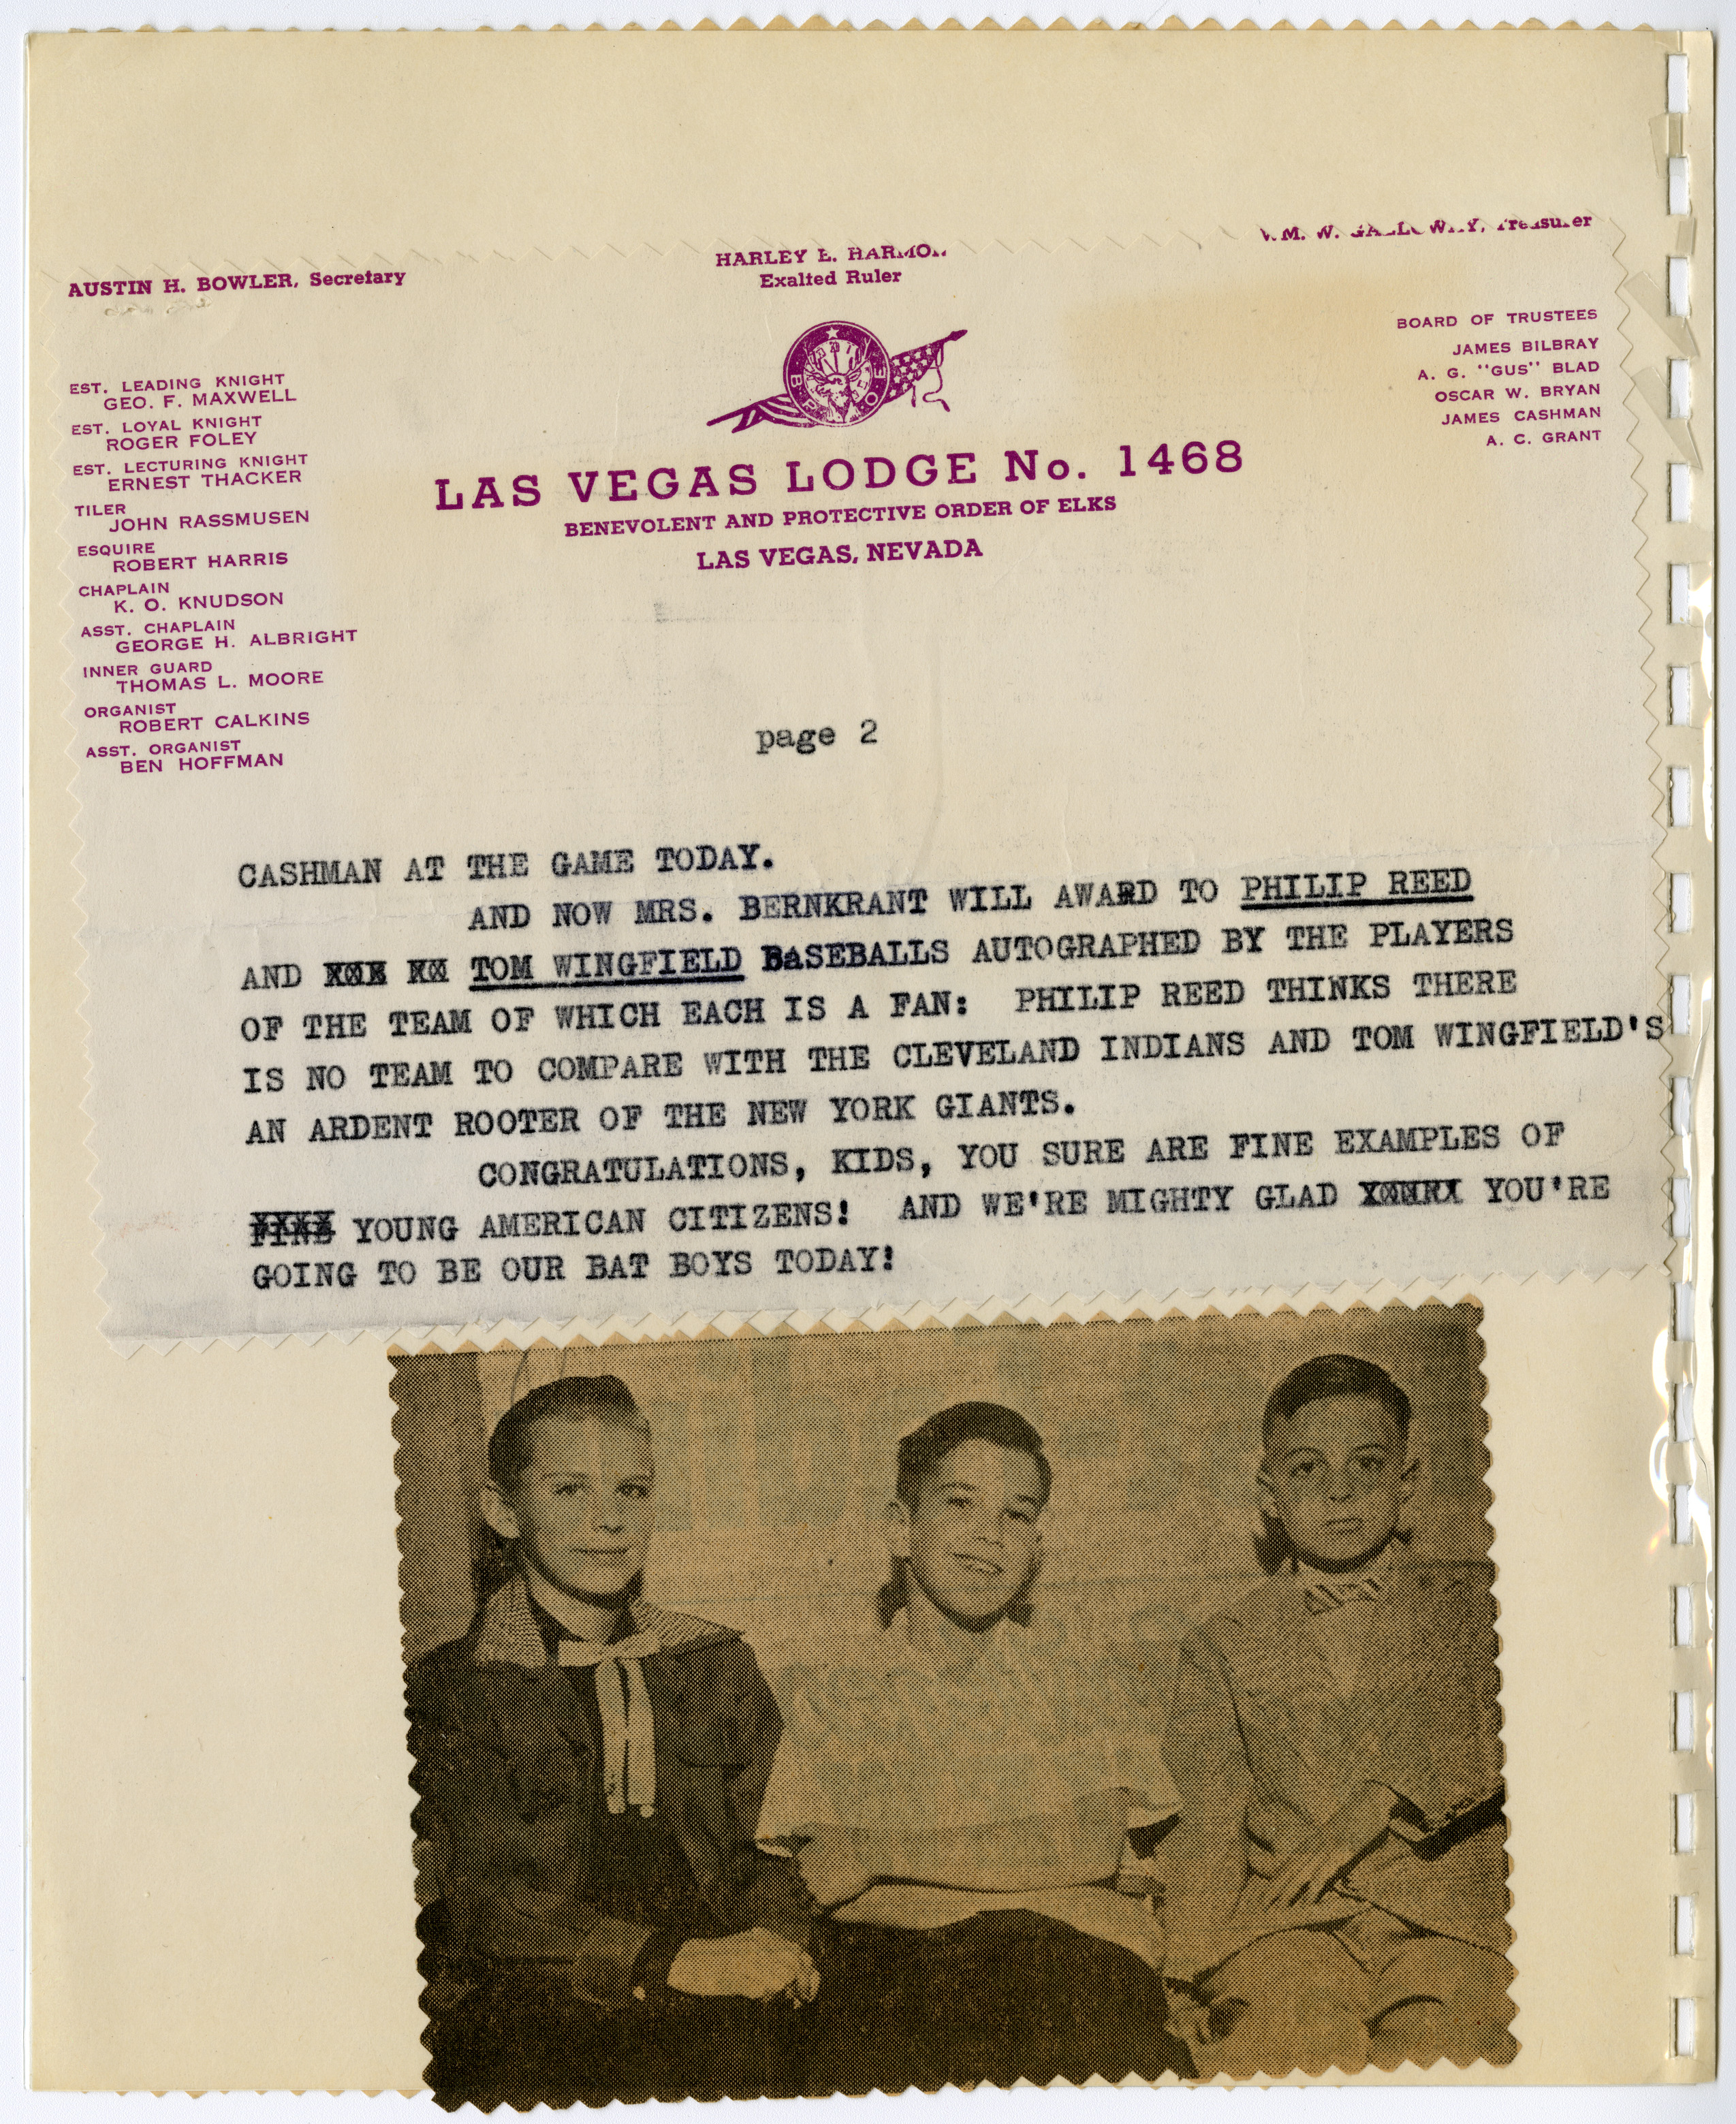 Album for the Americanism and Civic Affairs Committee of the Las Vegas B'nai B'rith Women, page 11